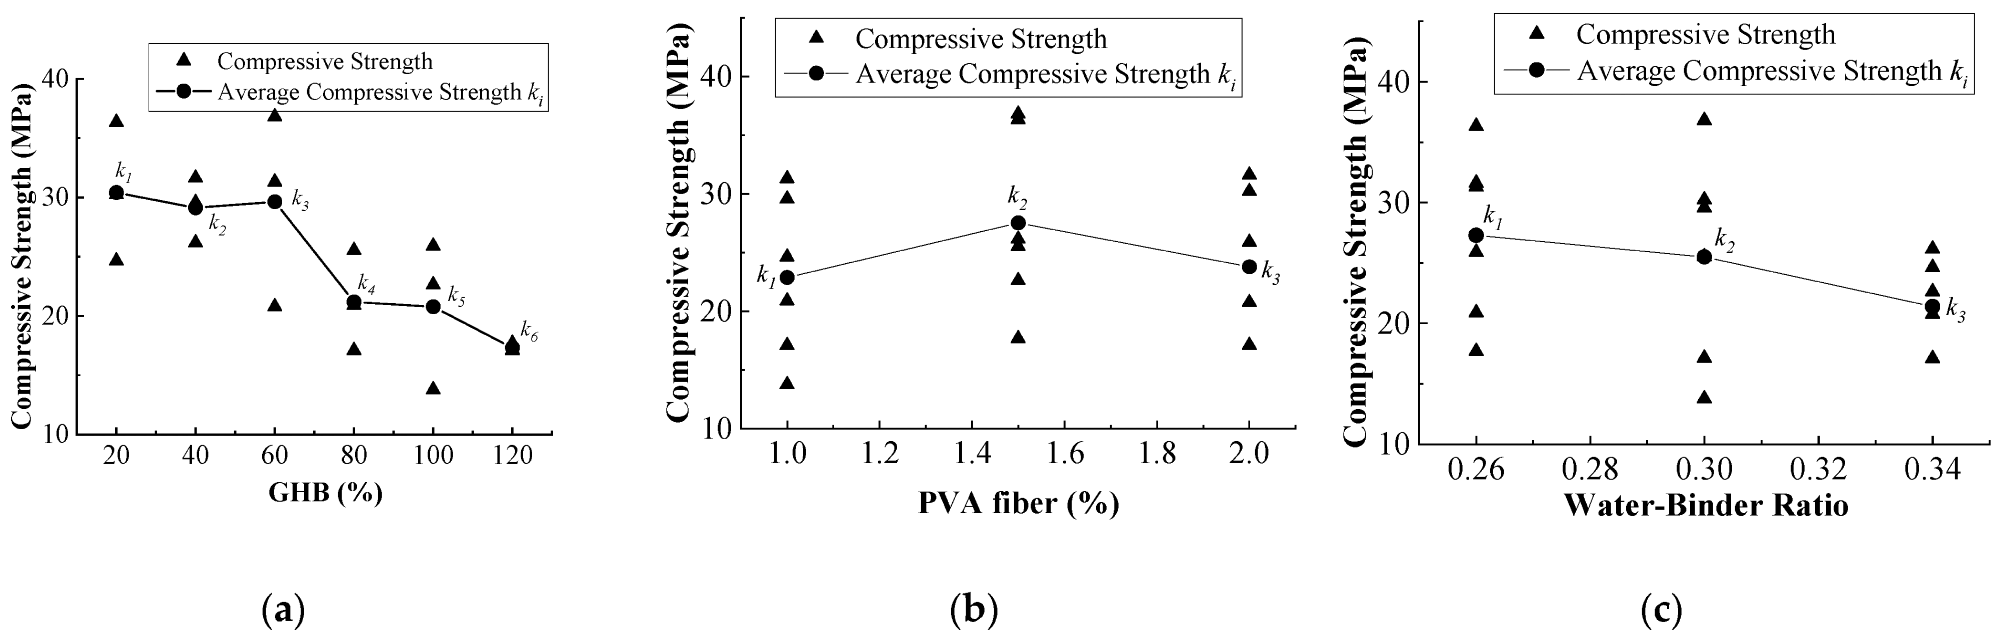 Relationship of GPCC split tensile strength with each factor: (a) GHB content; (b) PVA fiber content; (c) water-binder ratio.